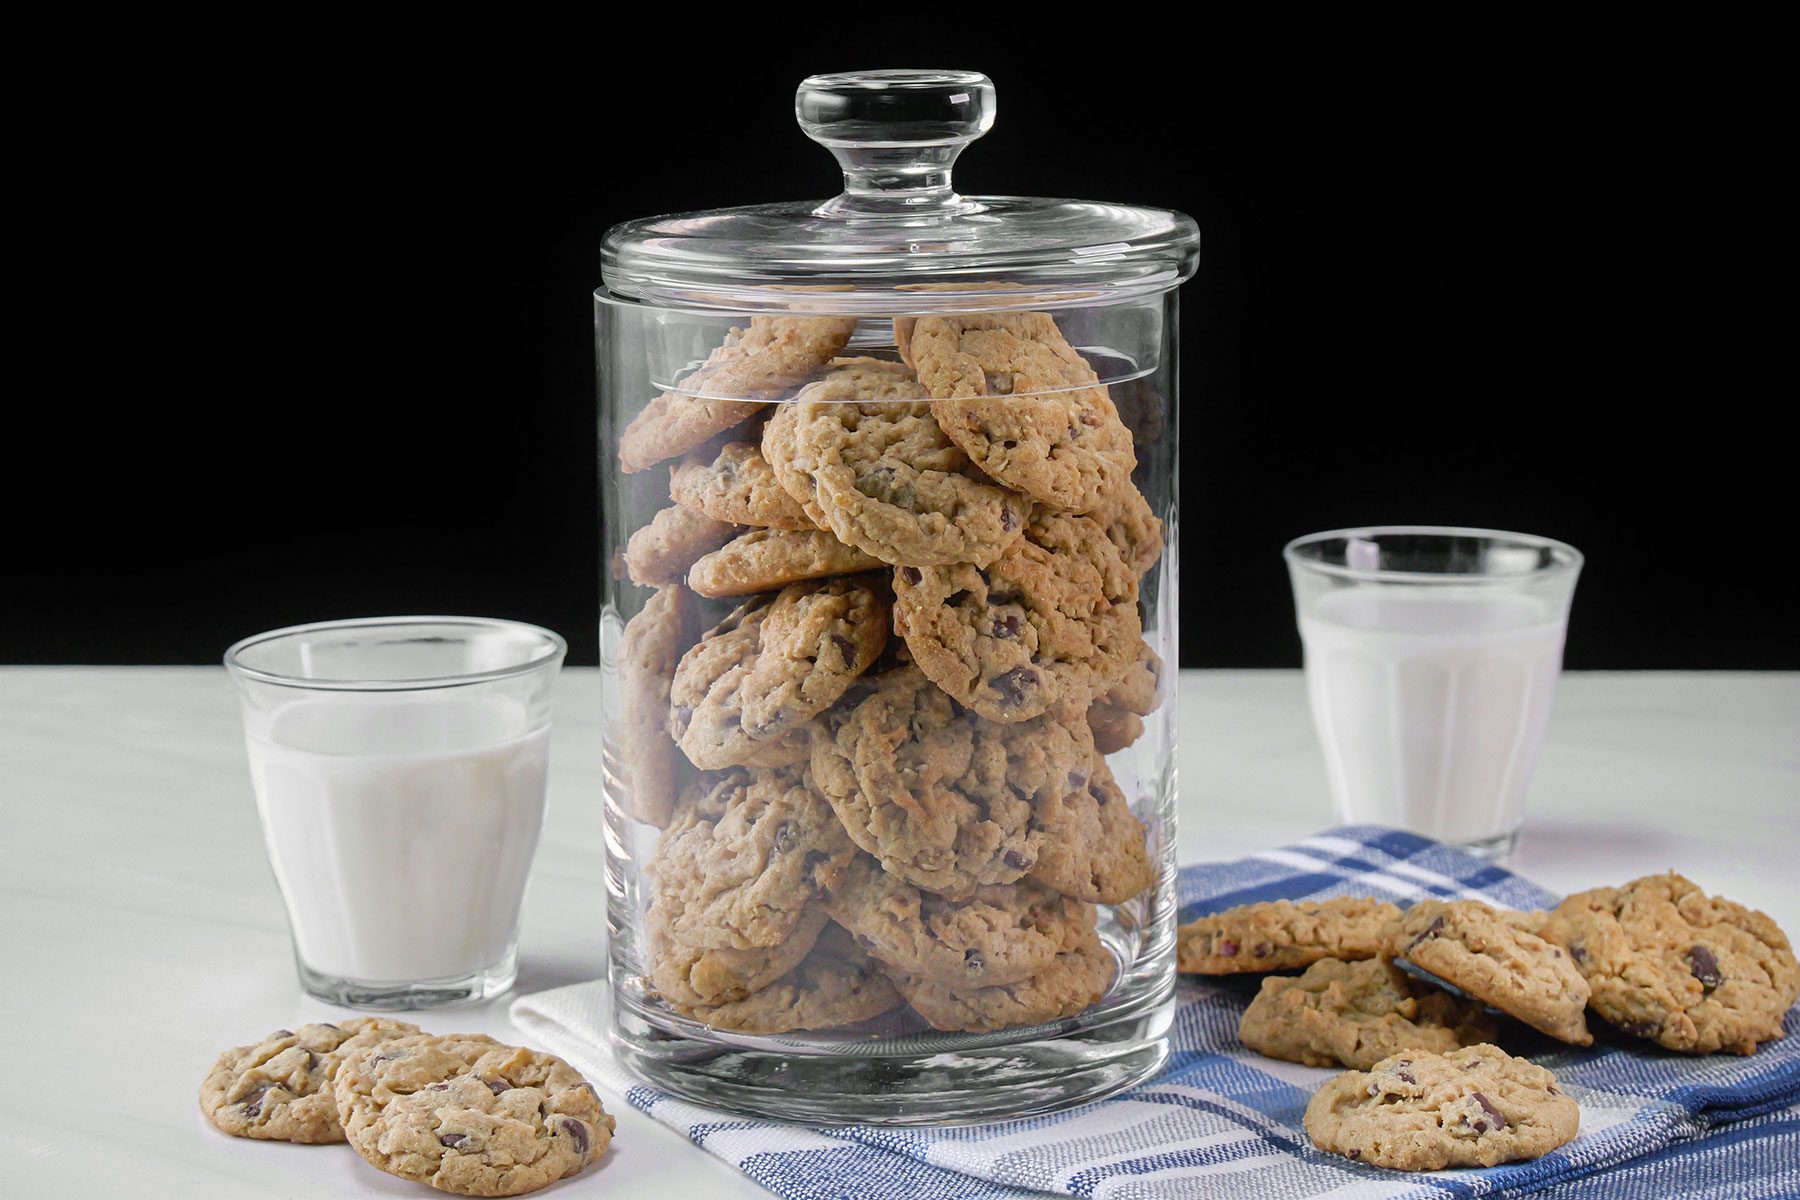 Peanut Butter Chocolate Chip Cookies stored in a glass jar and served on plate with glasses of milk on the side